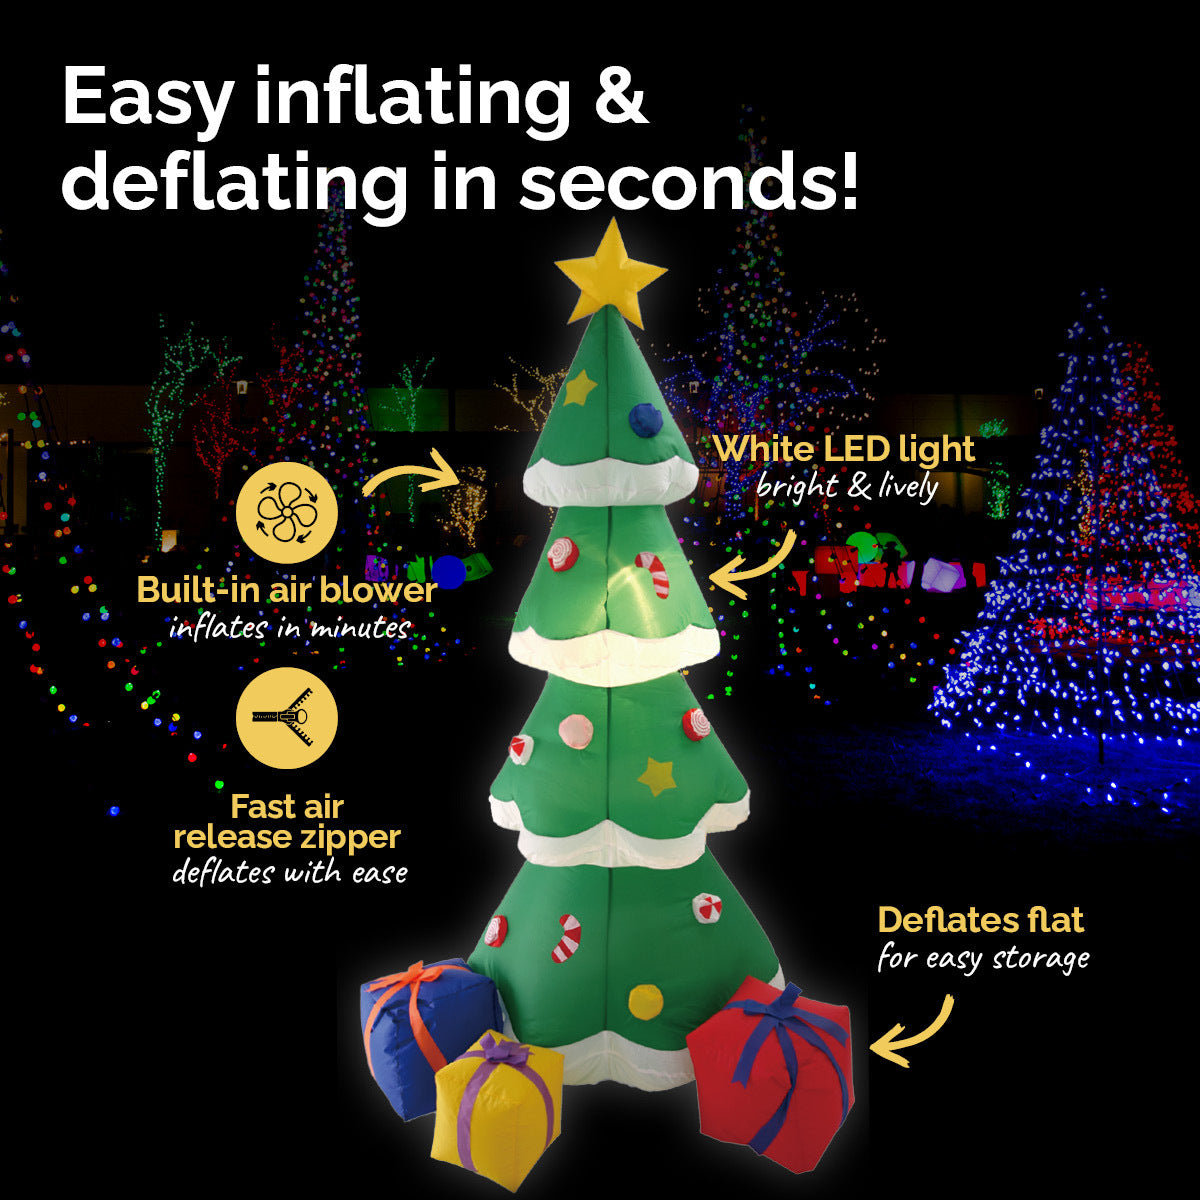 Christmas By Sas 1.8m Self Inflatable LED Tree With Presents